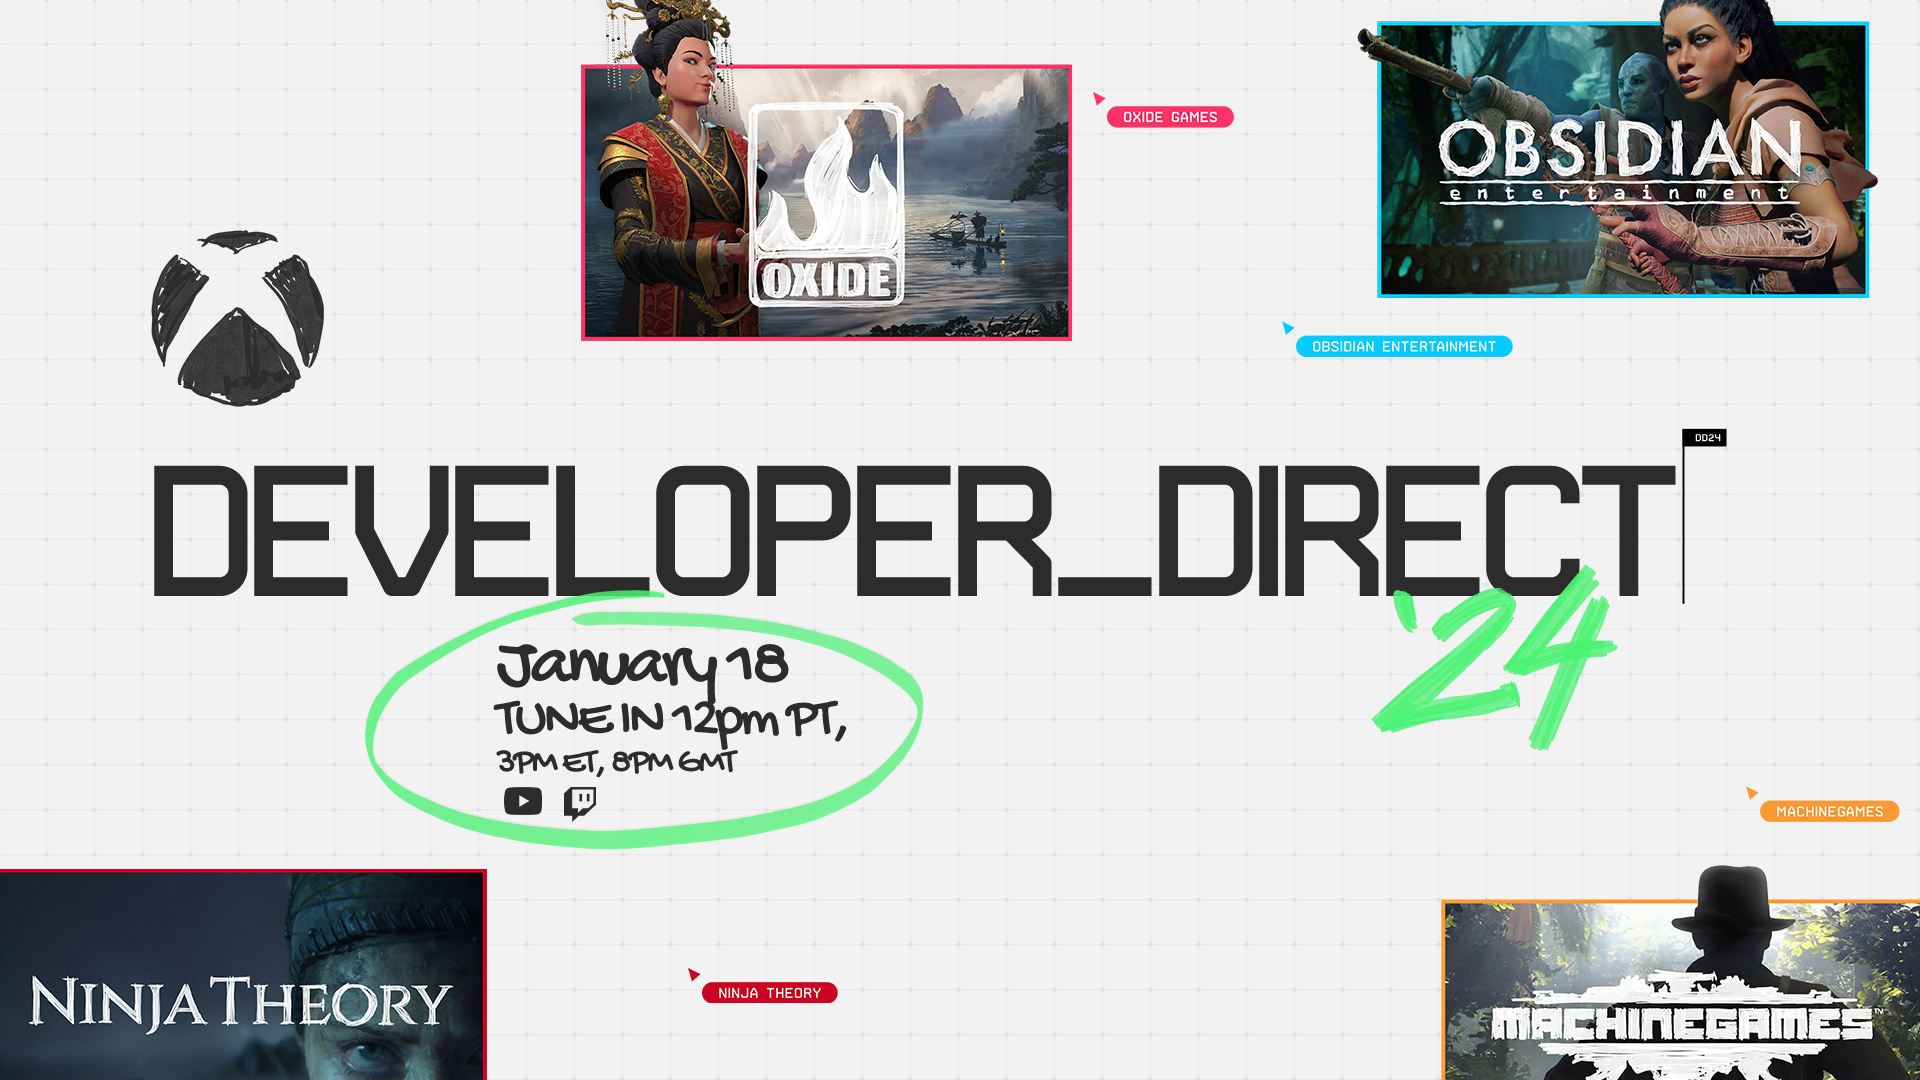 Developers_Direct Xbox